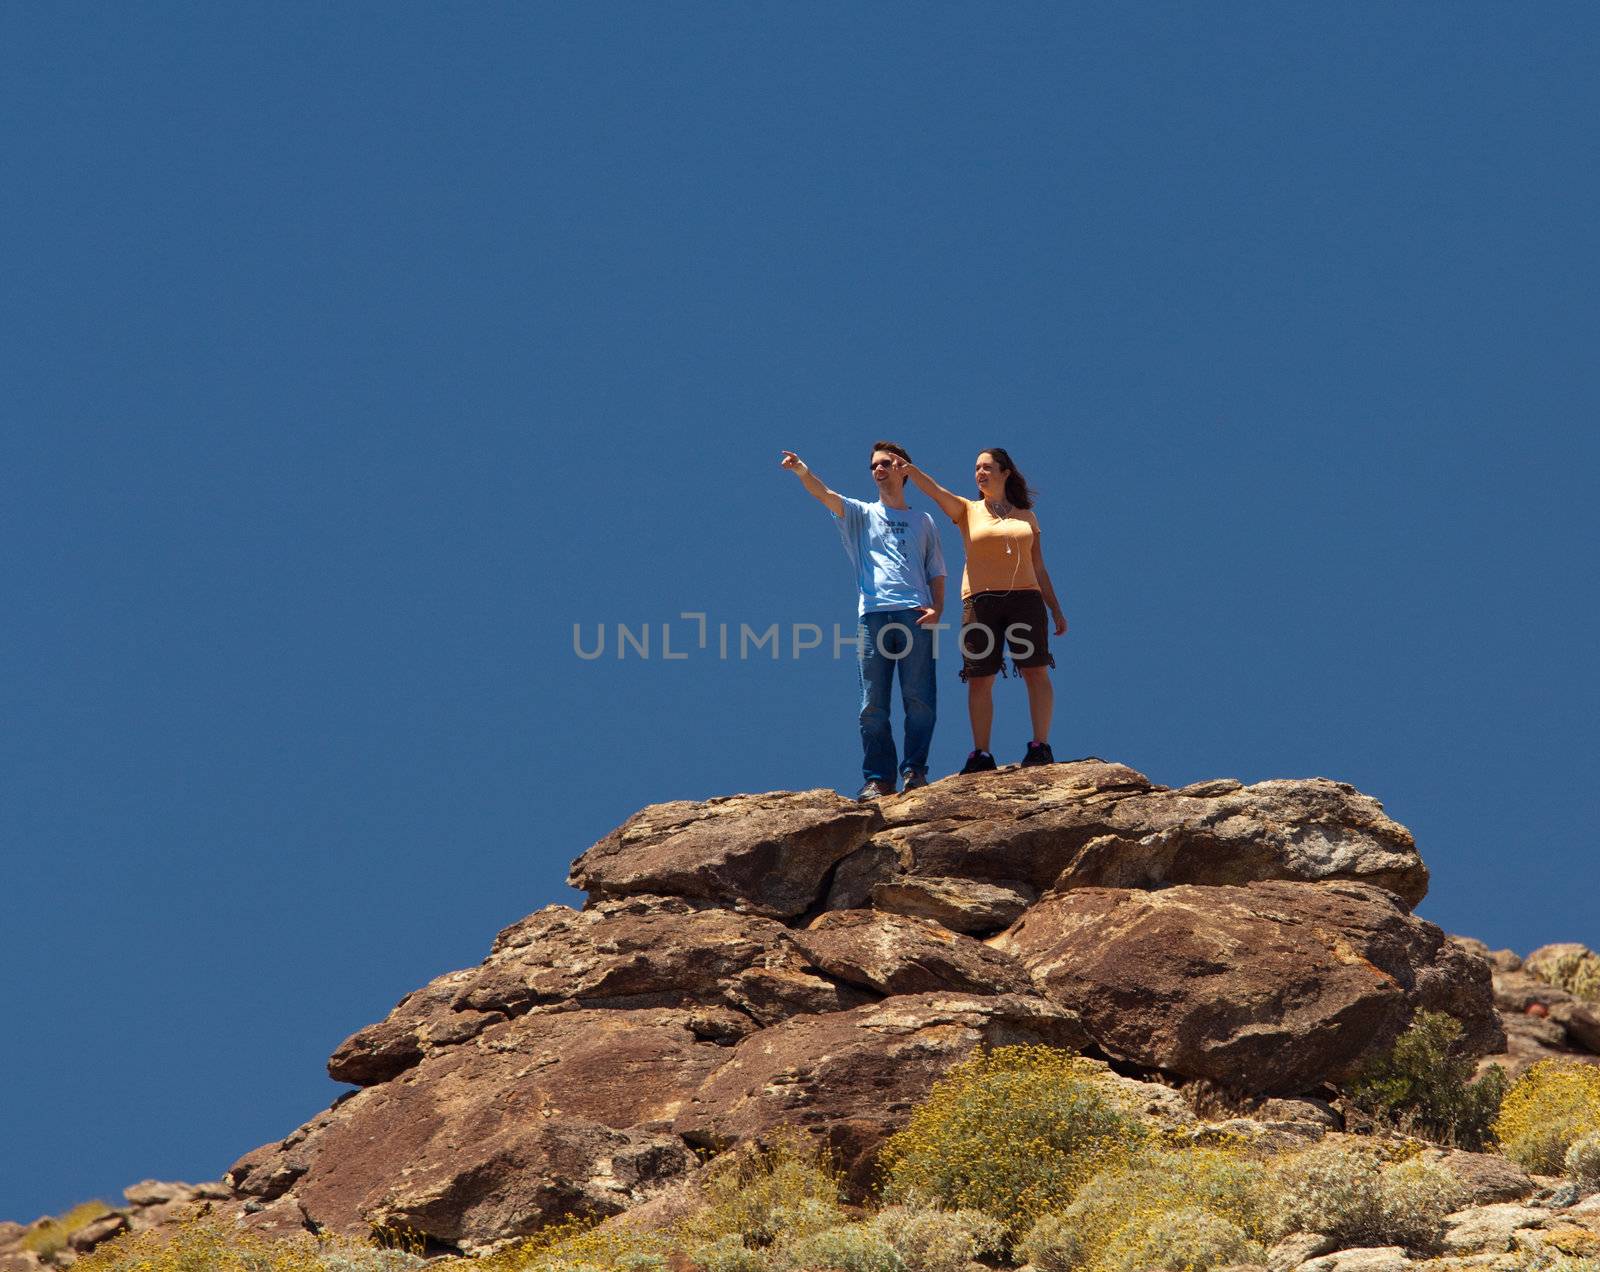 Hikers in desert point to distant object by steheap